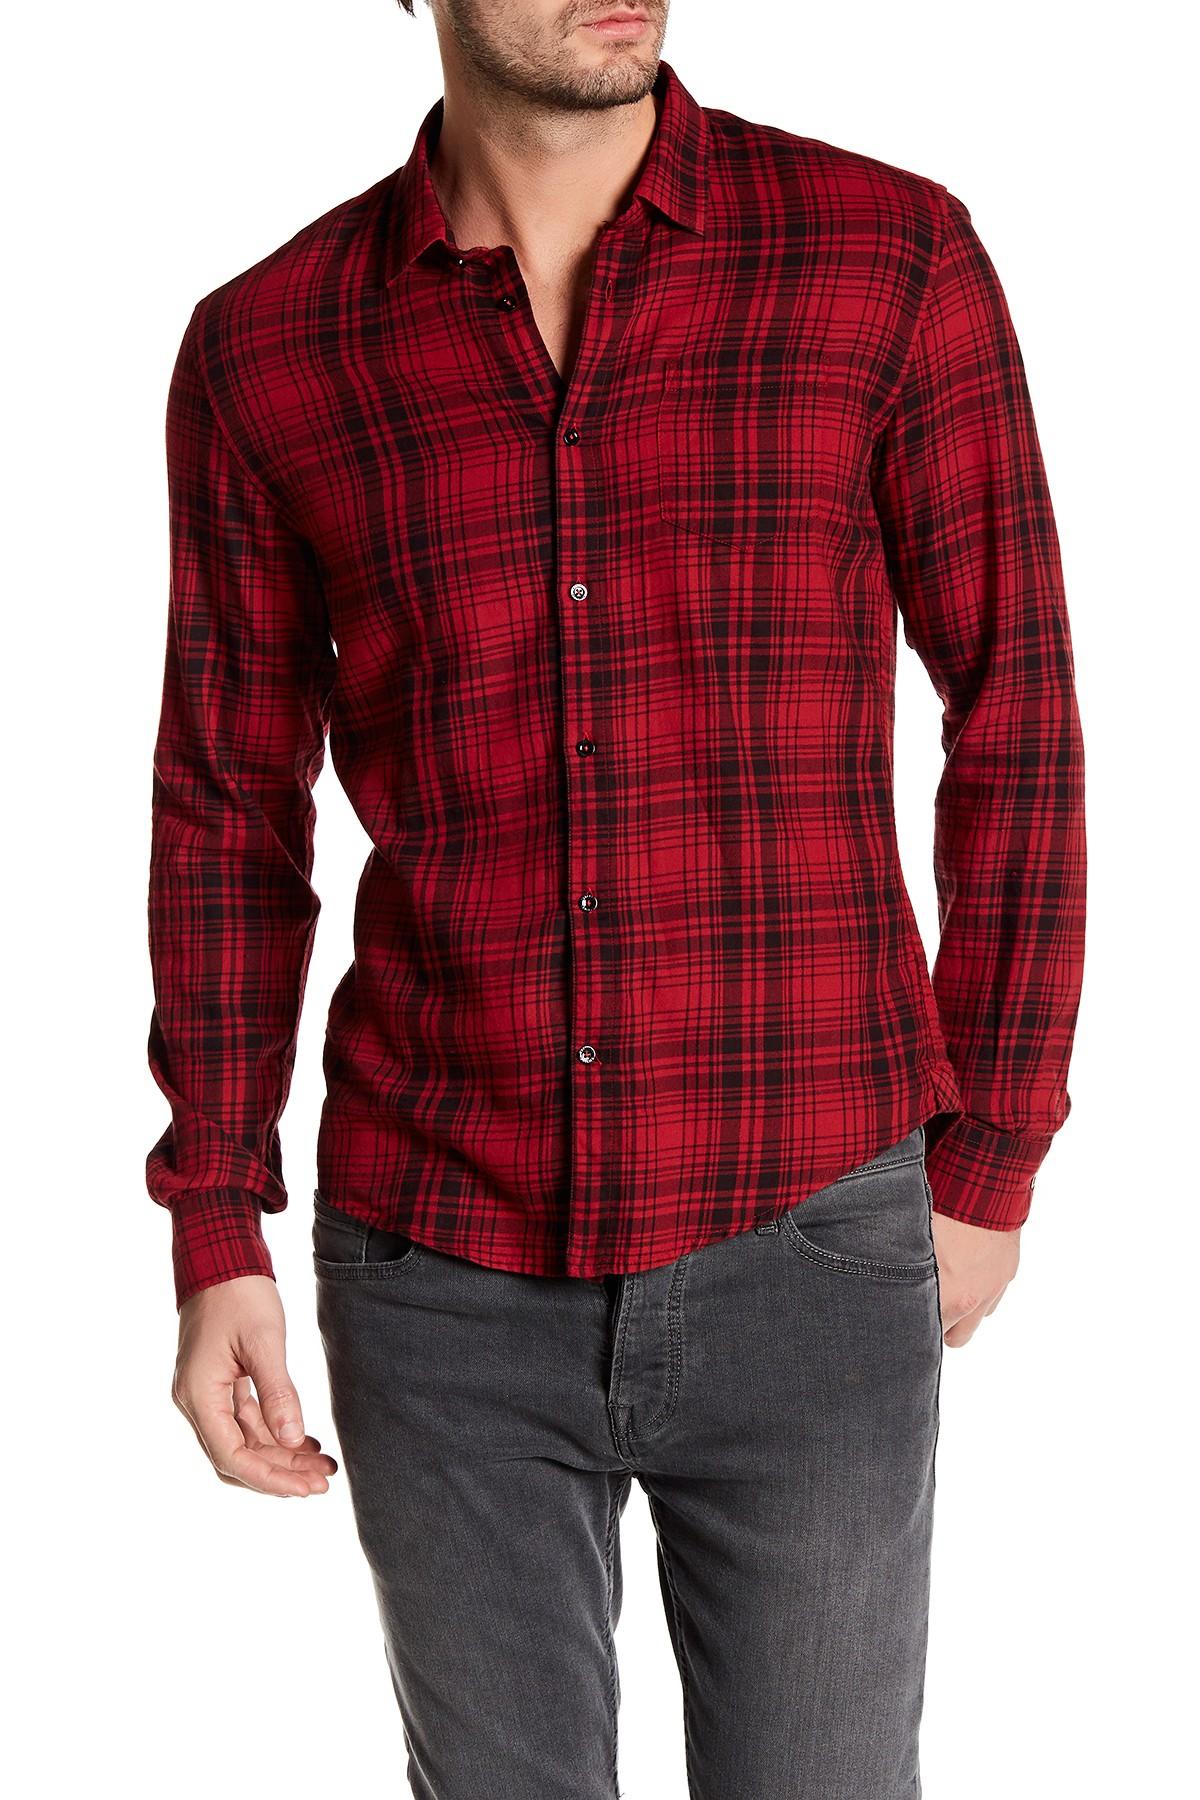 Woolrich Flannel Fitted Hunting Shirt in Red Hunting (Red) for Men - Lyst